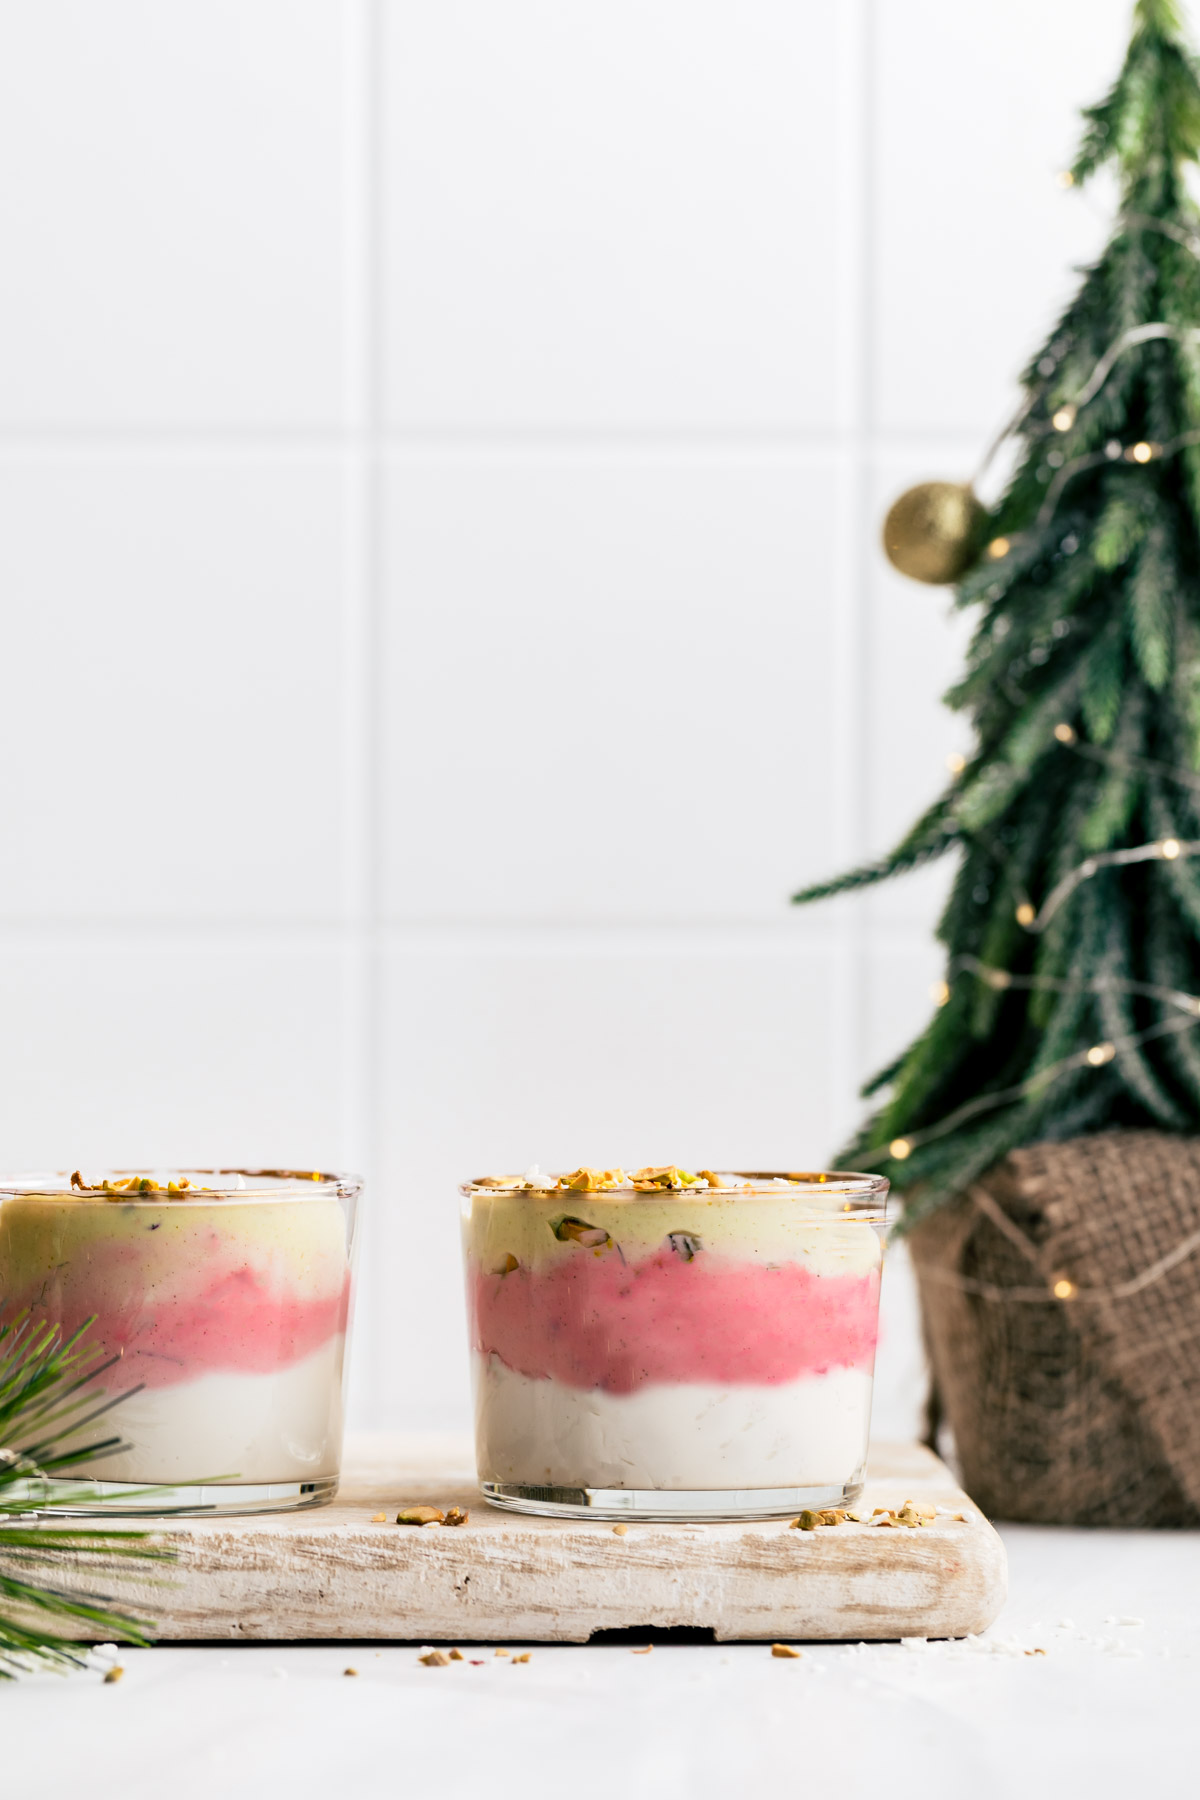 Two Christmas smoothies in a small glass topped with chopped pistachio nuts on a wooden cutting board in front of a small Christmas tree